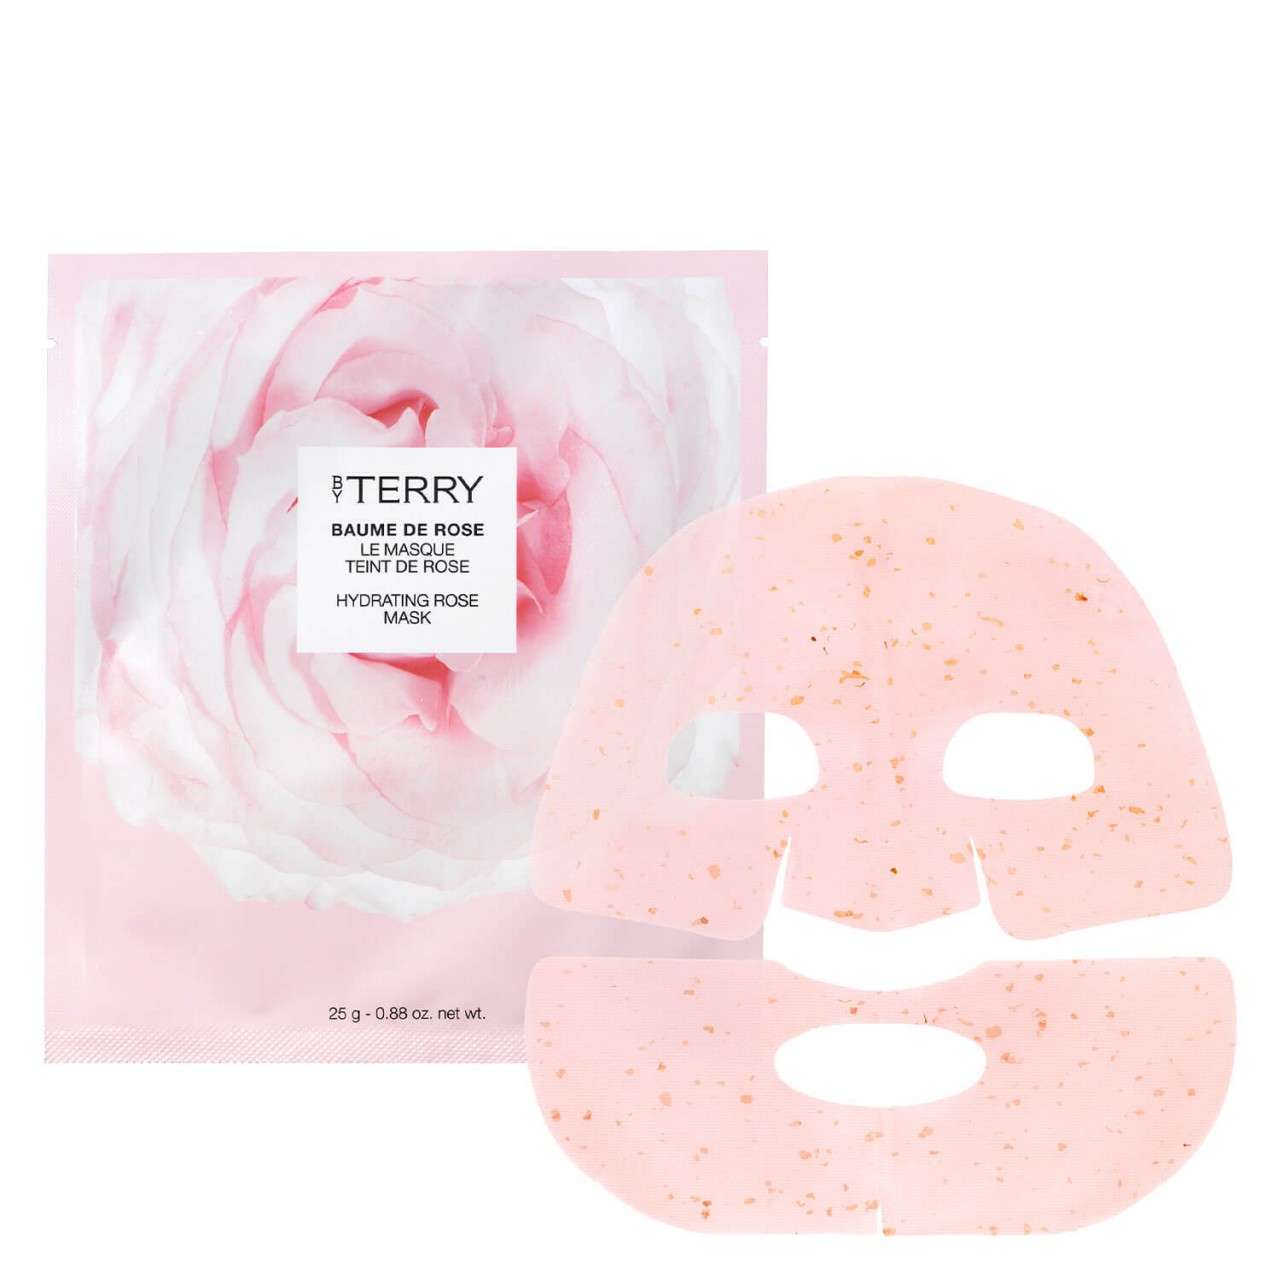 By Terry Care - Baume de Rose Hydrating Sheet Mask von BY TERRY